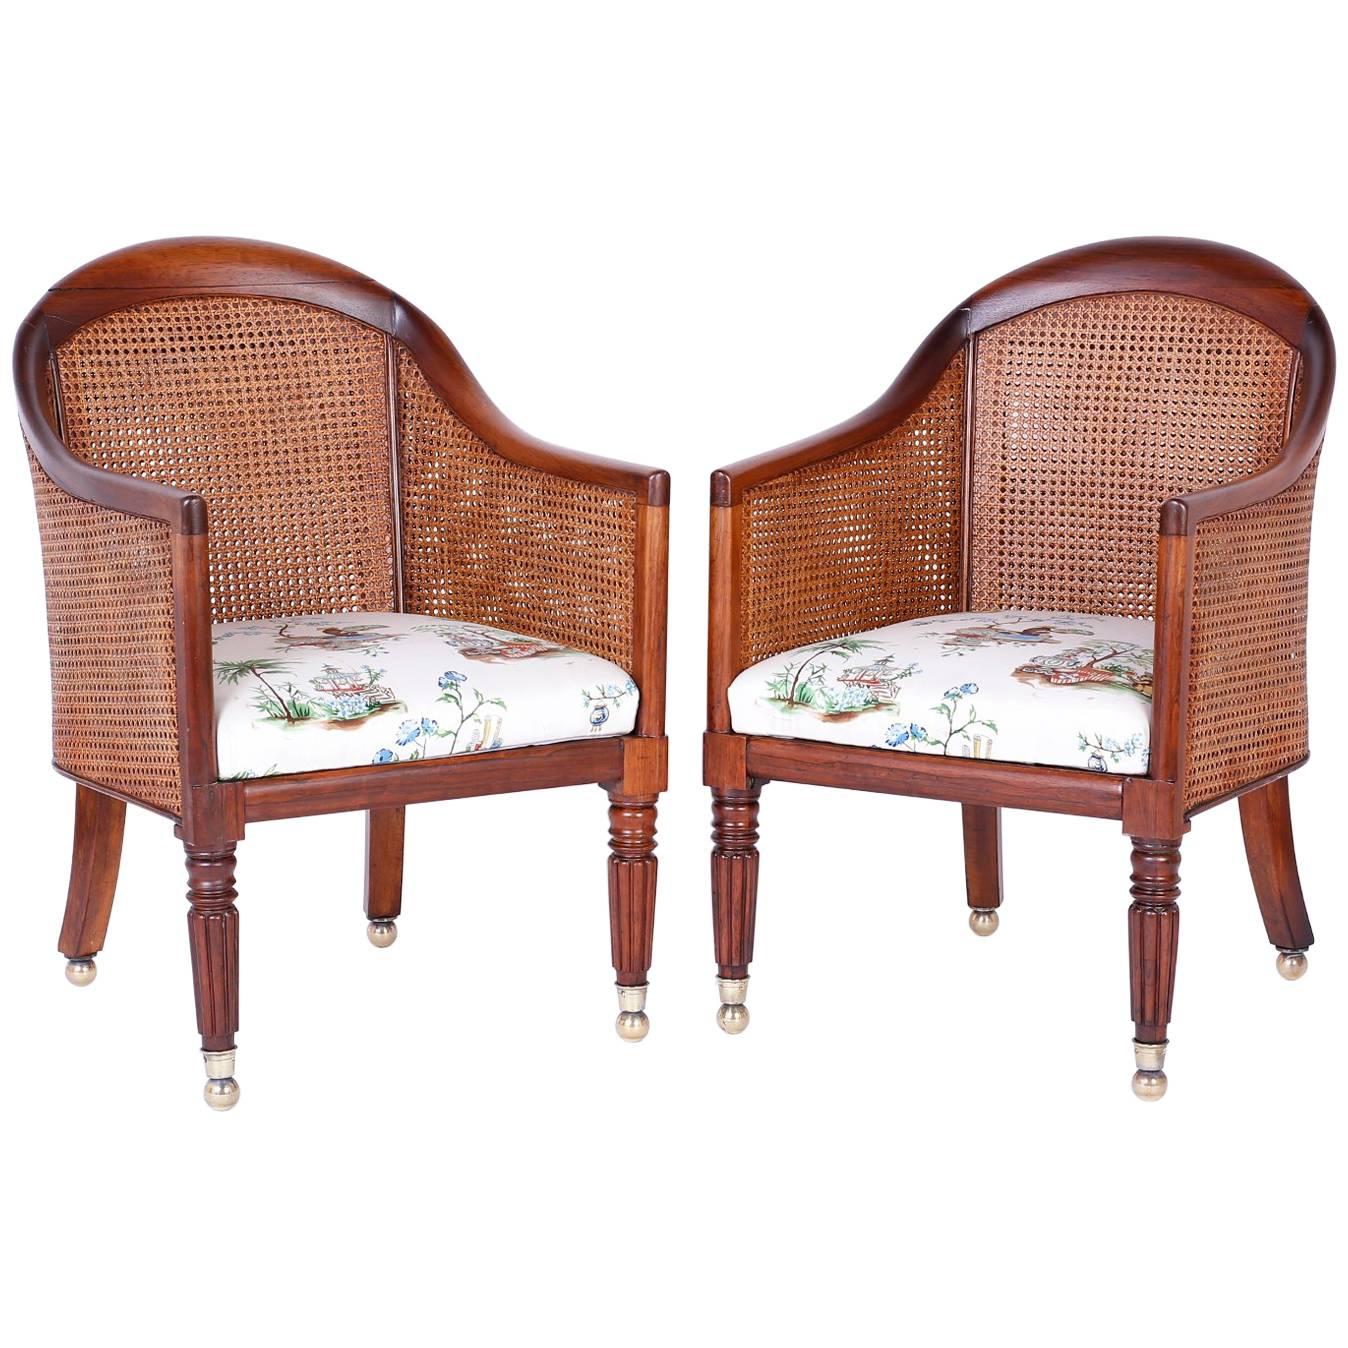 British Colonial Pair of Antique Rosewood Tub Chairs